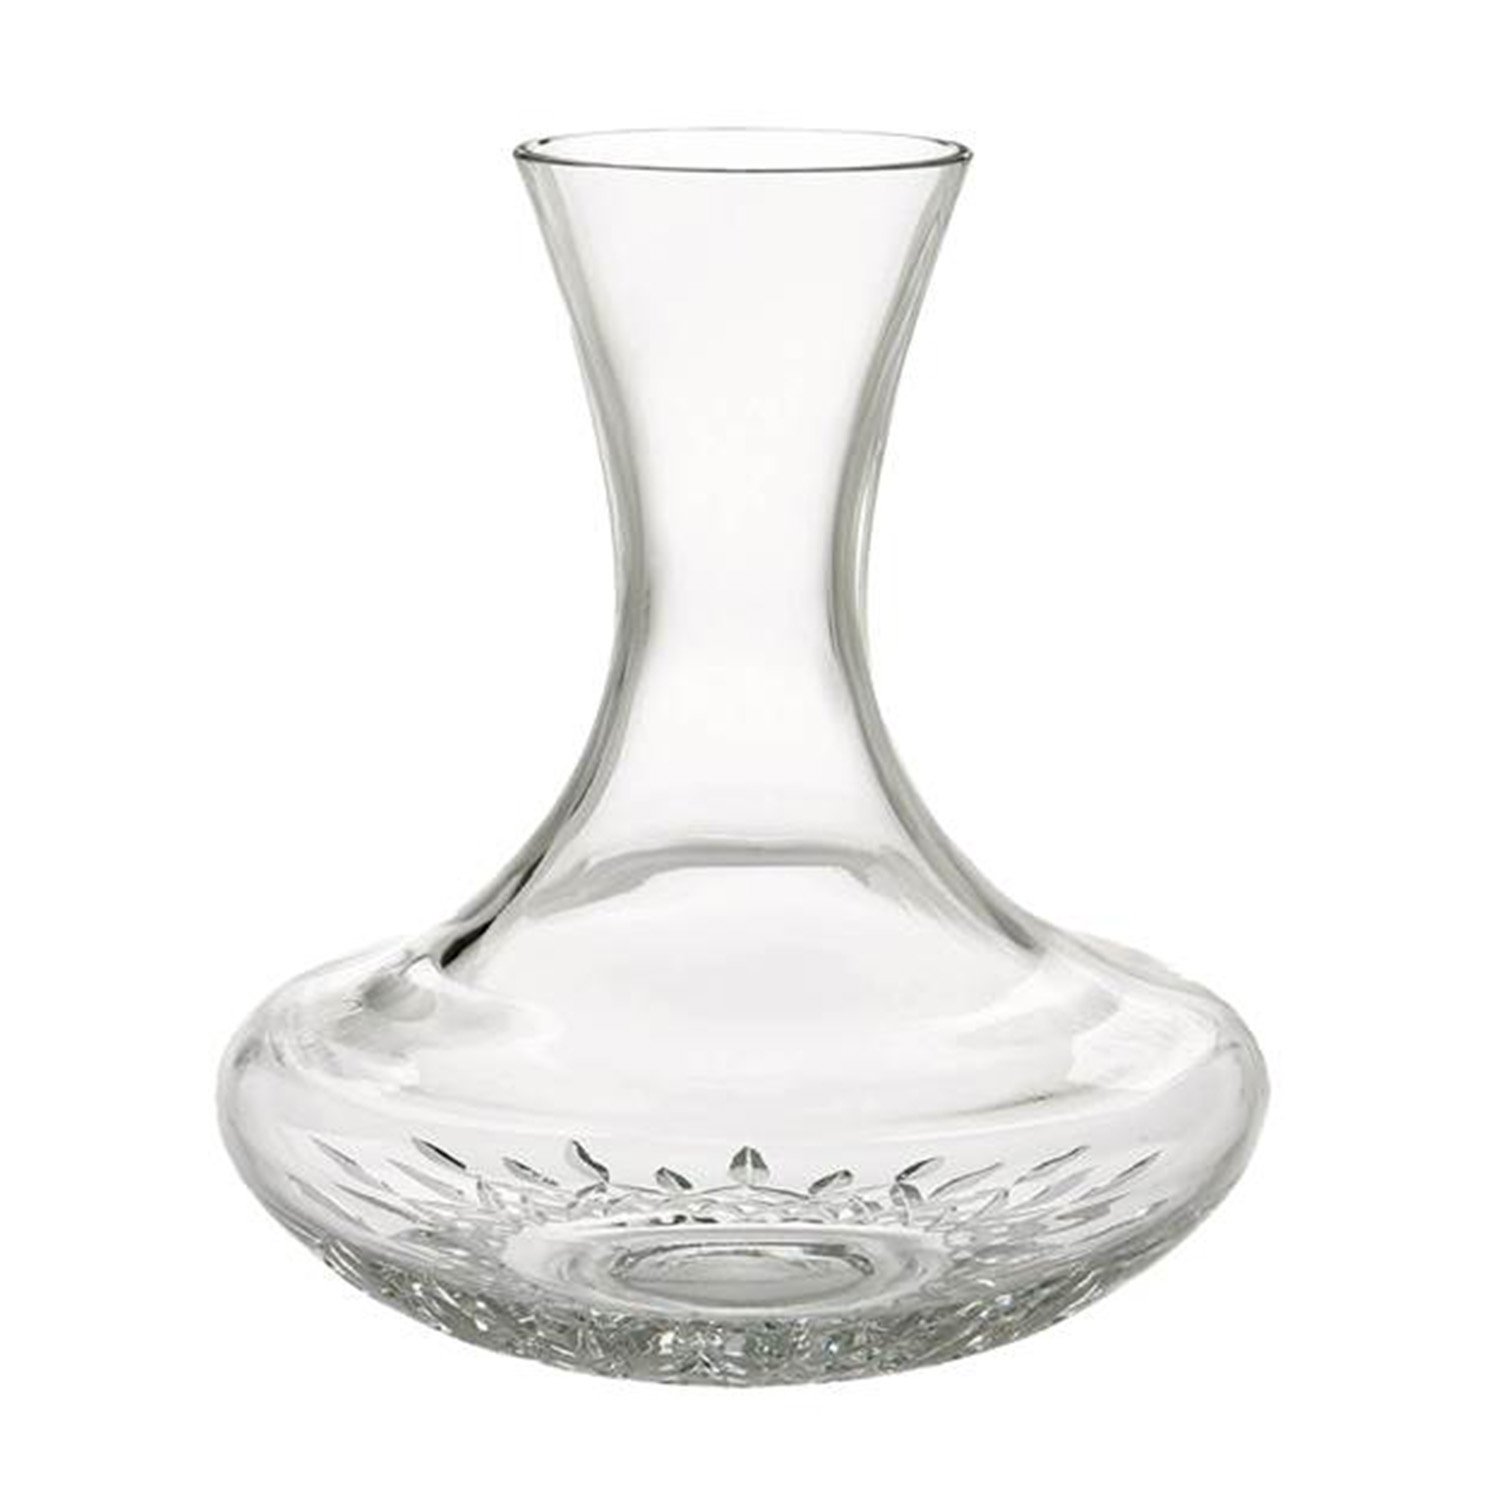 Waterford Lismore Nouveau Decanting Carafe 0